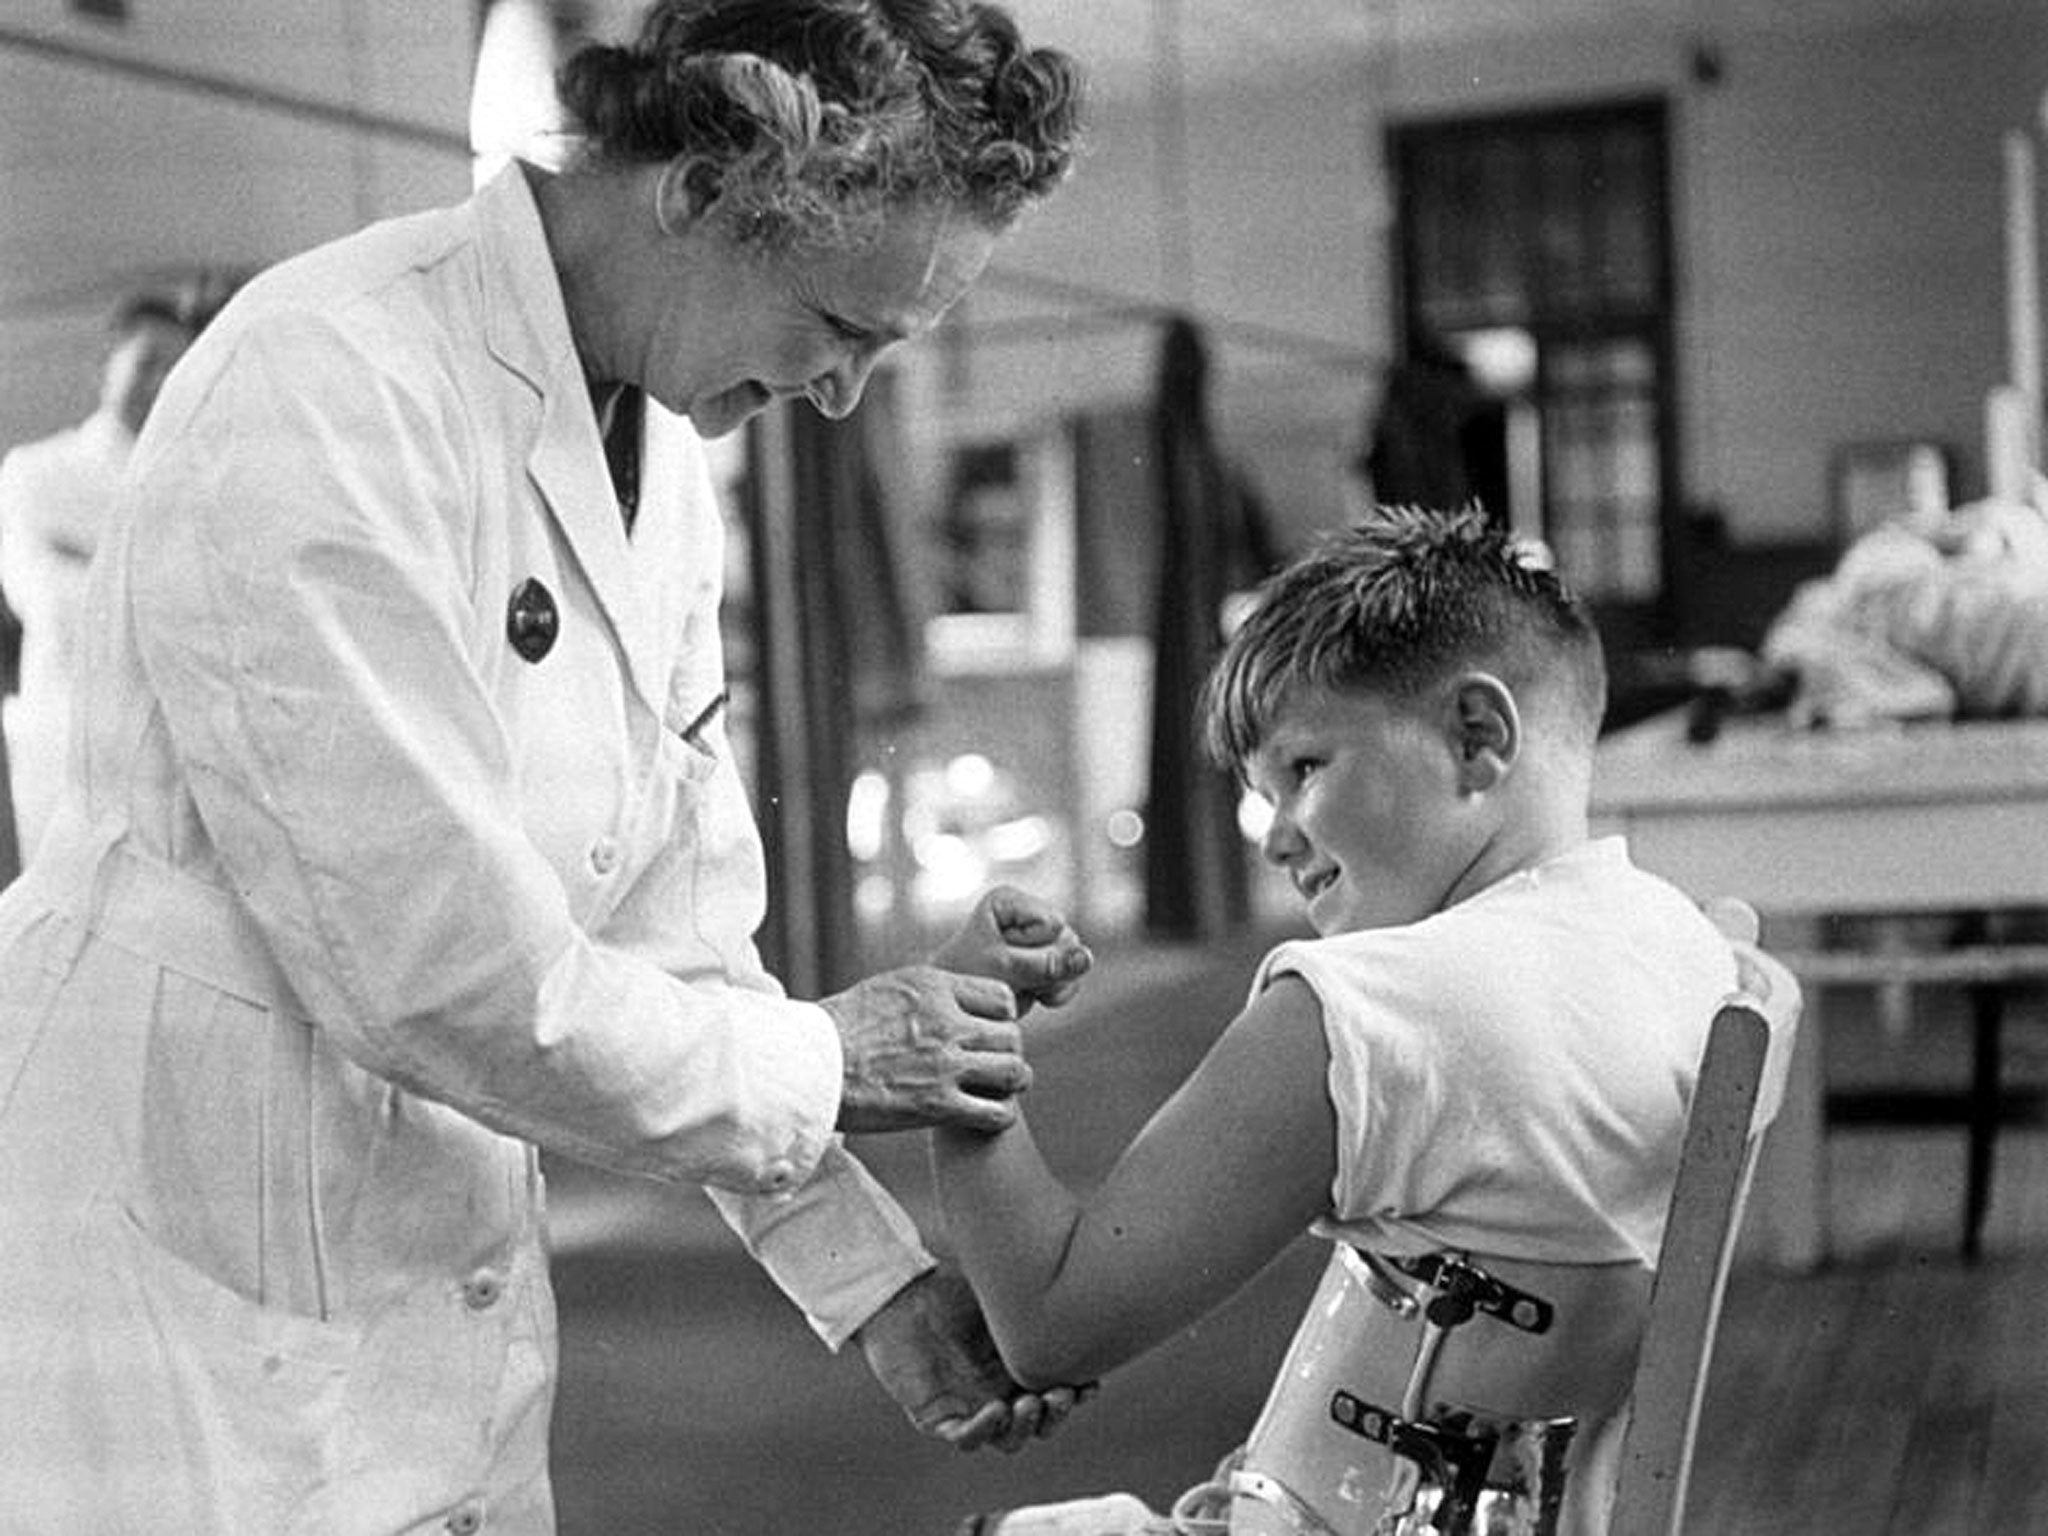 Caring hands: a hospitalised child with polio in 1947